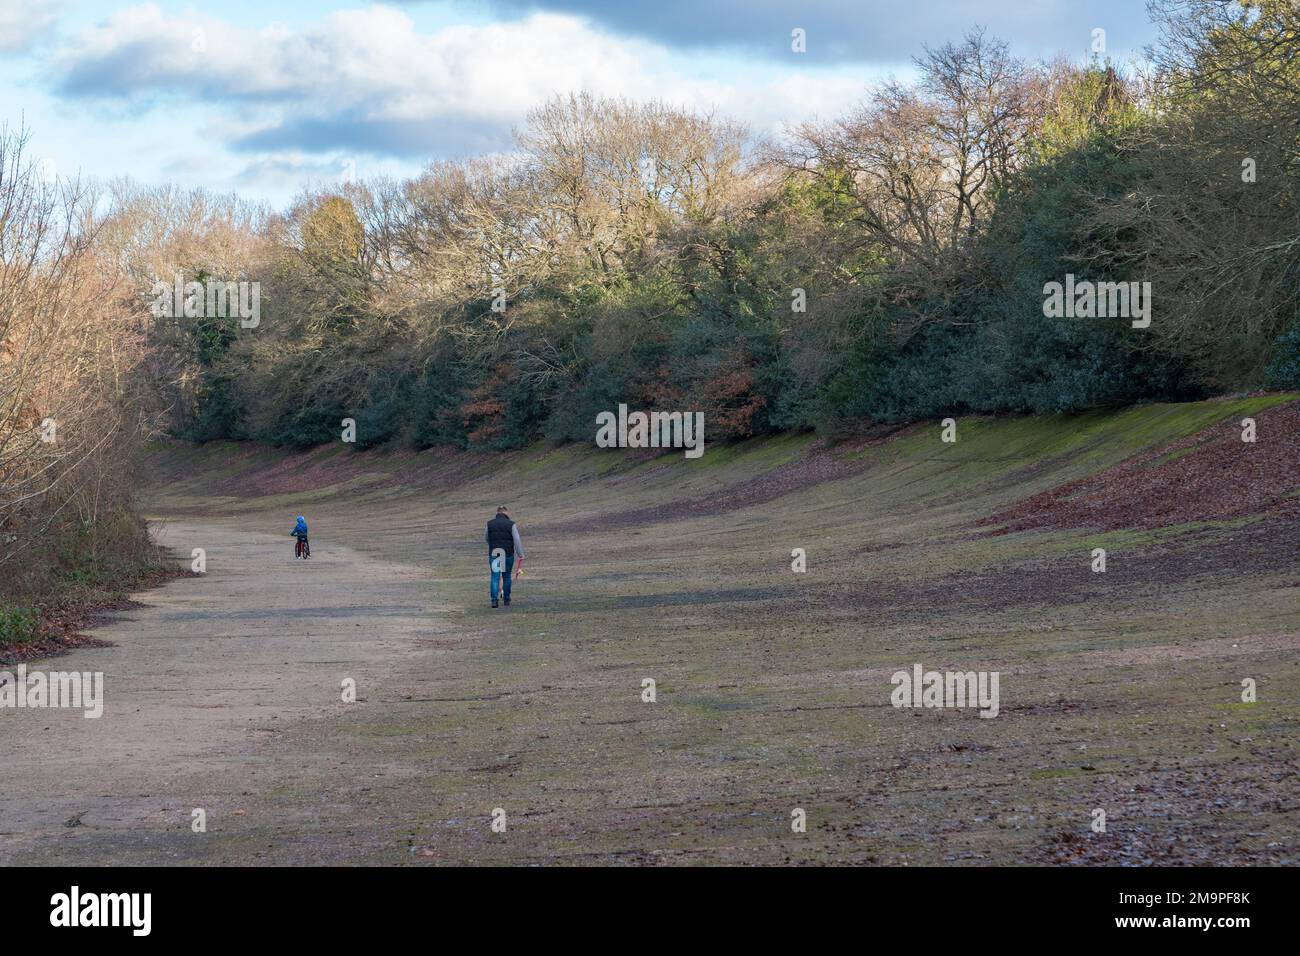 View along part of the historic banked race track at Brooklands, Surrey, UK. Stock Photo